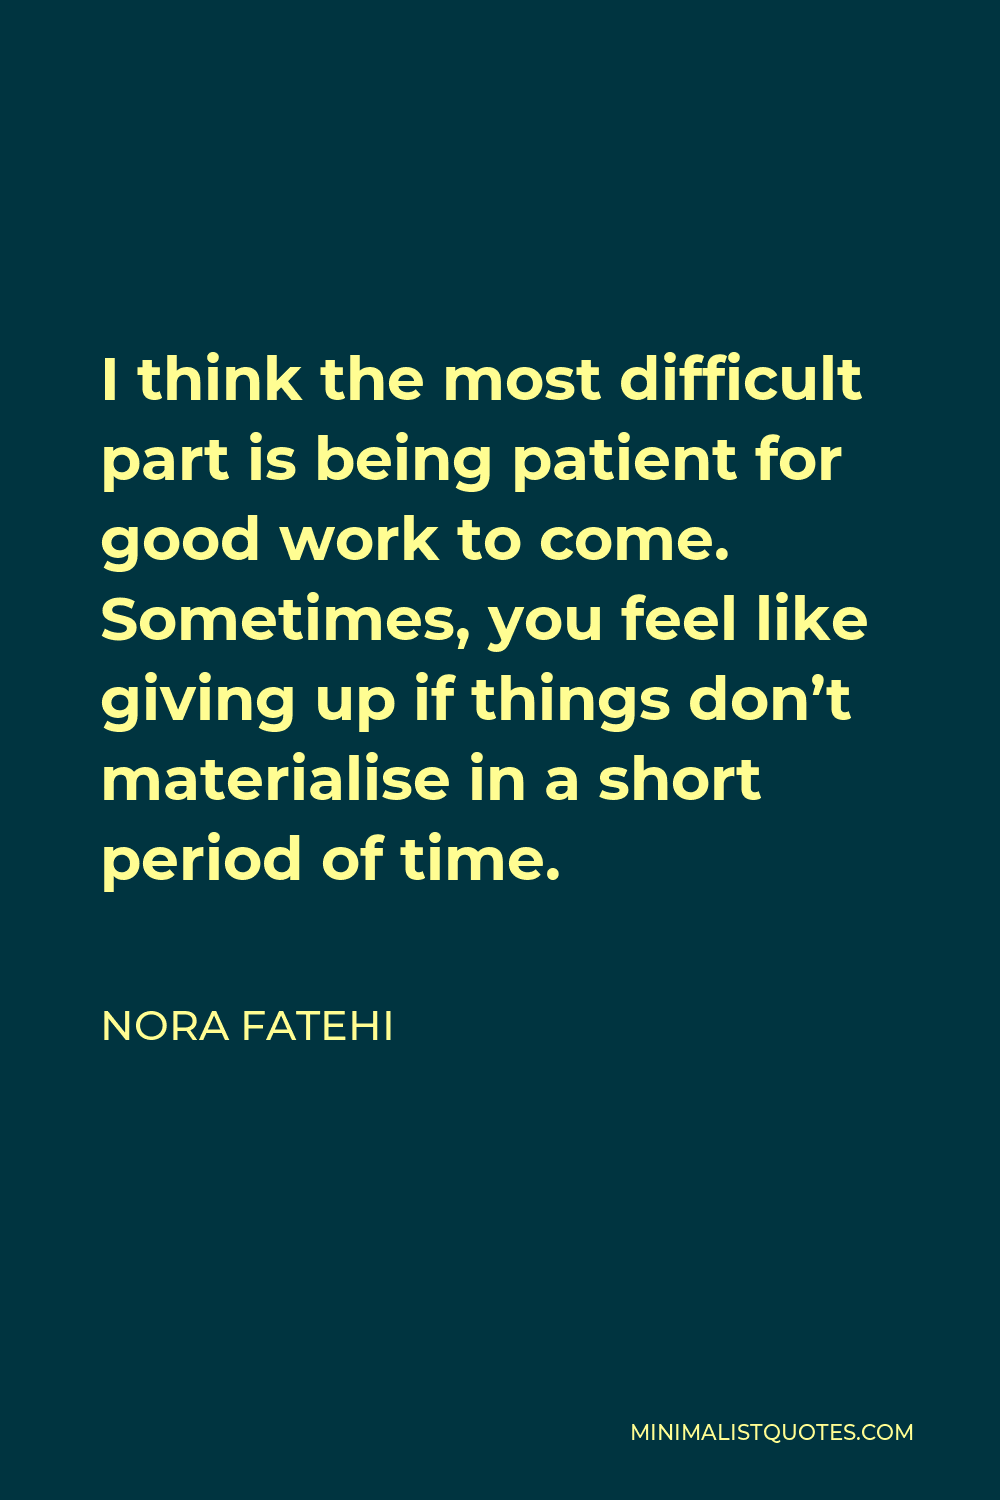 Nora Fatehi Quote - I think the most difficult part is being patient for good work to come. Sometimes, you feel like giving up if things don’t materialise in a short period of time.